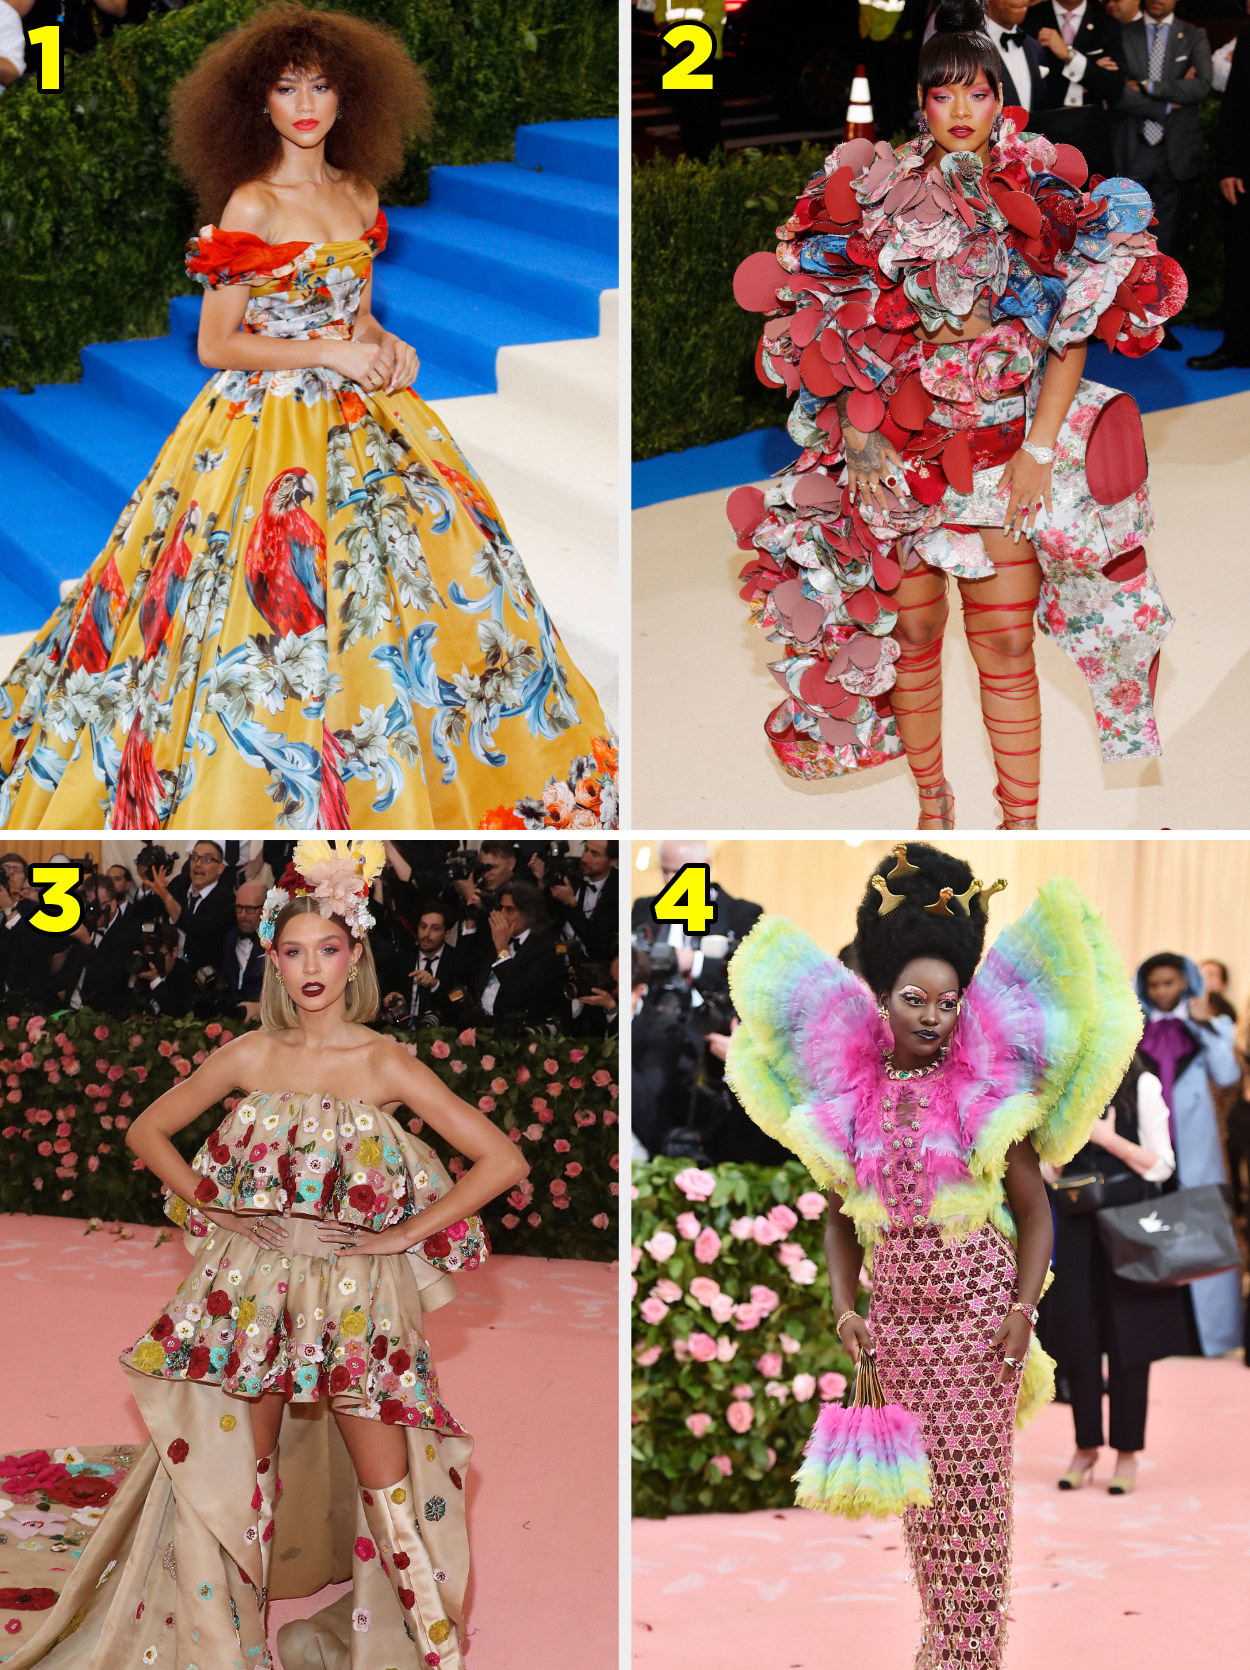 1. An off shoulder ballgown with a parrot printed on it. 2. A textured asymmetrical gown with floral print. 3. A tiered gown with flowers painted on. 4. A straight gown with giant shoulder pads made of feathers.